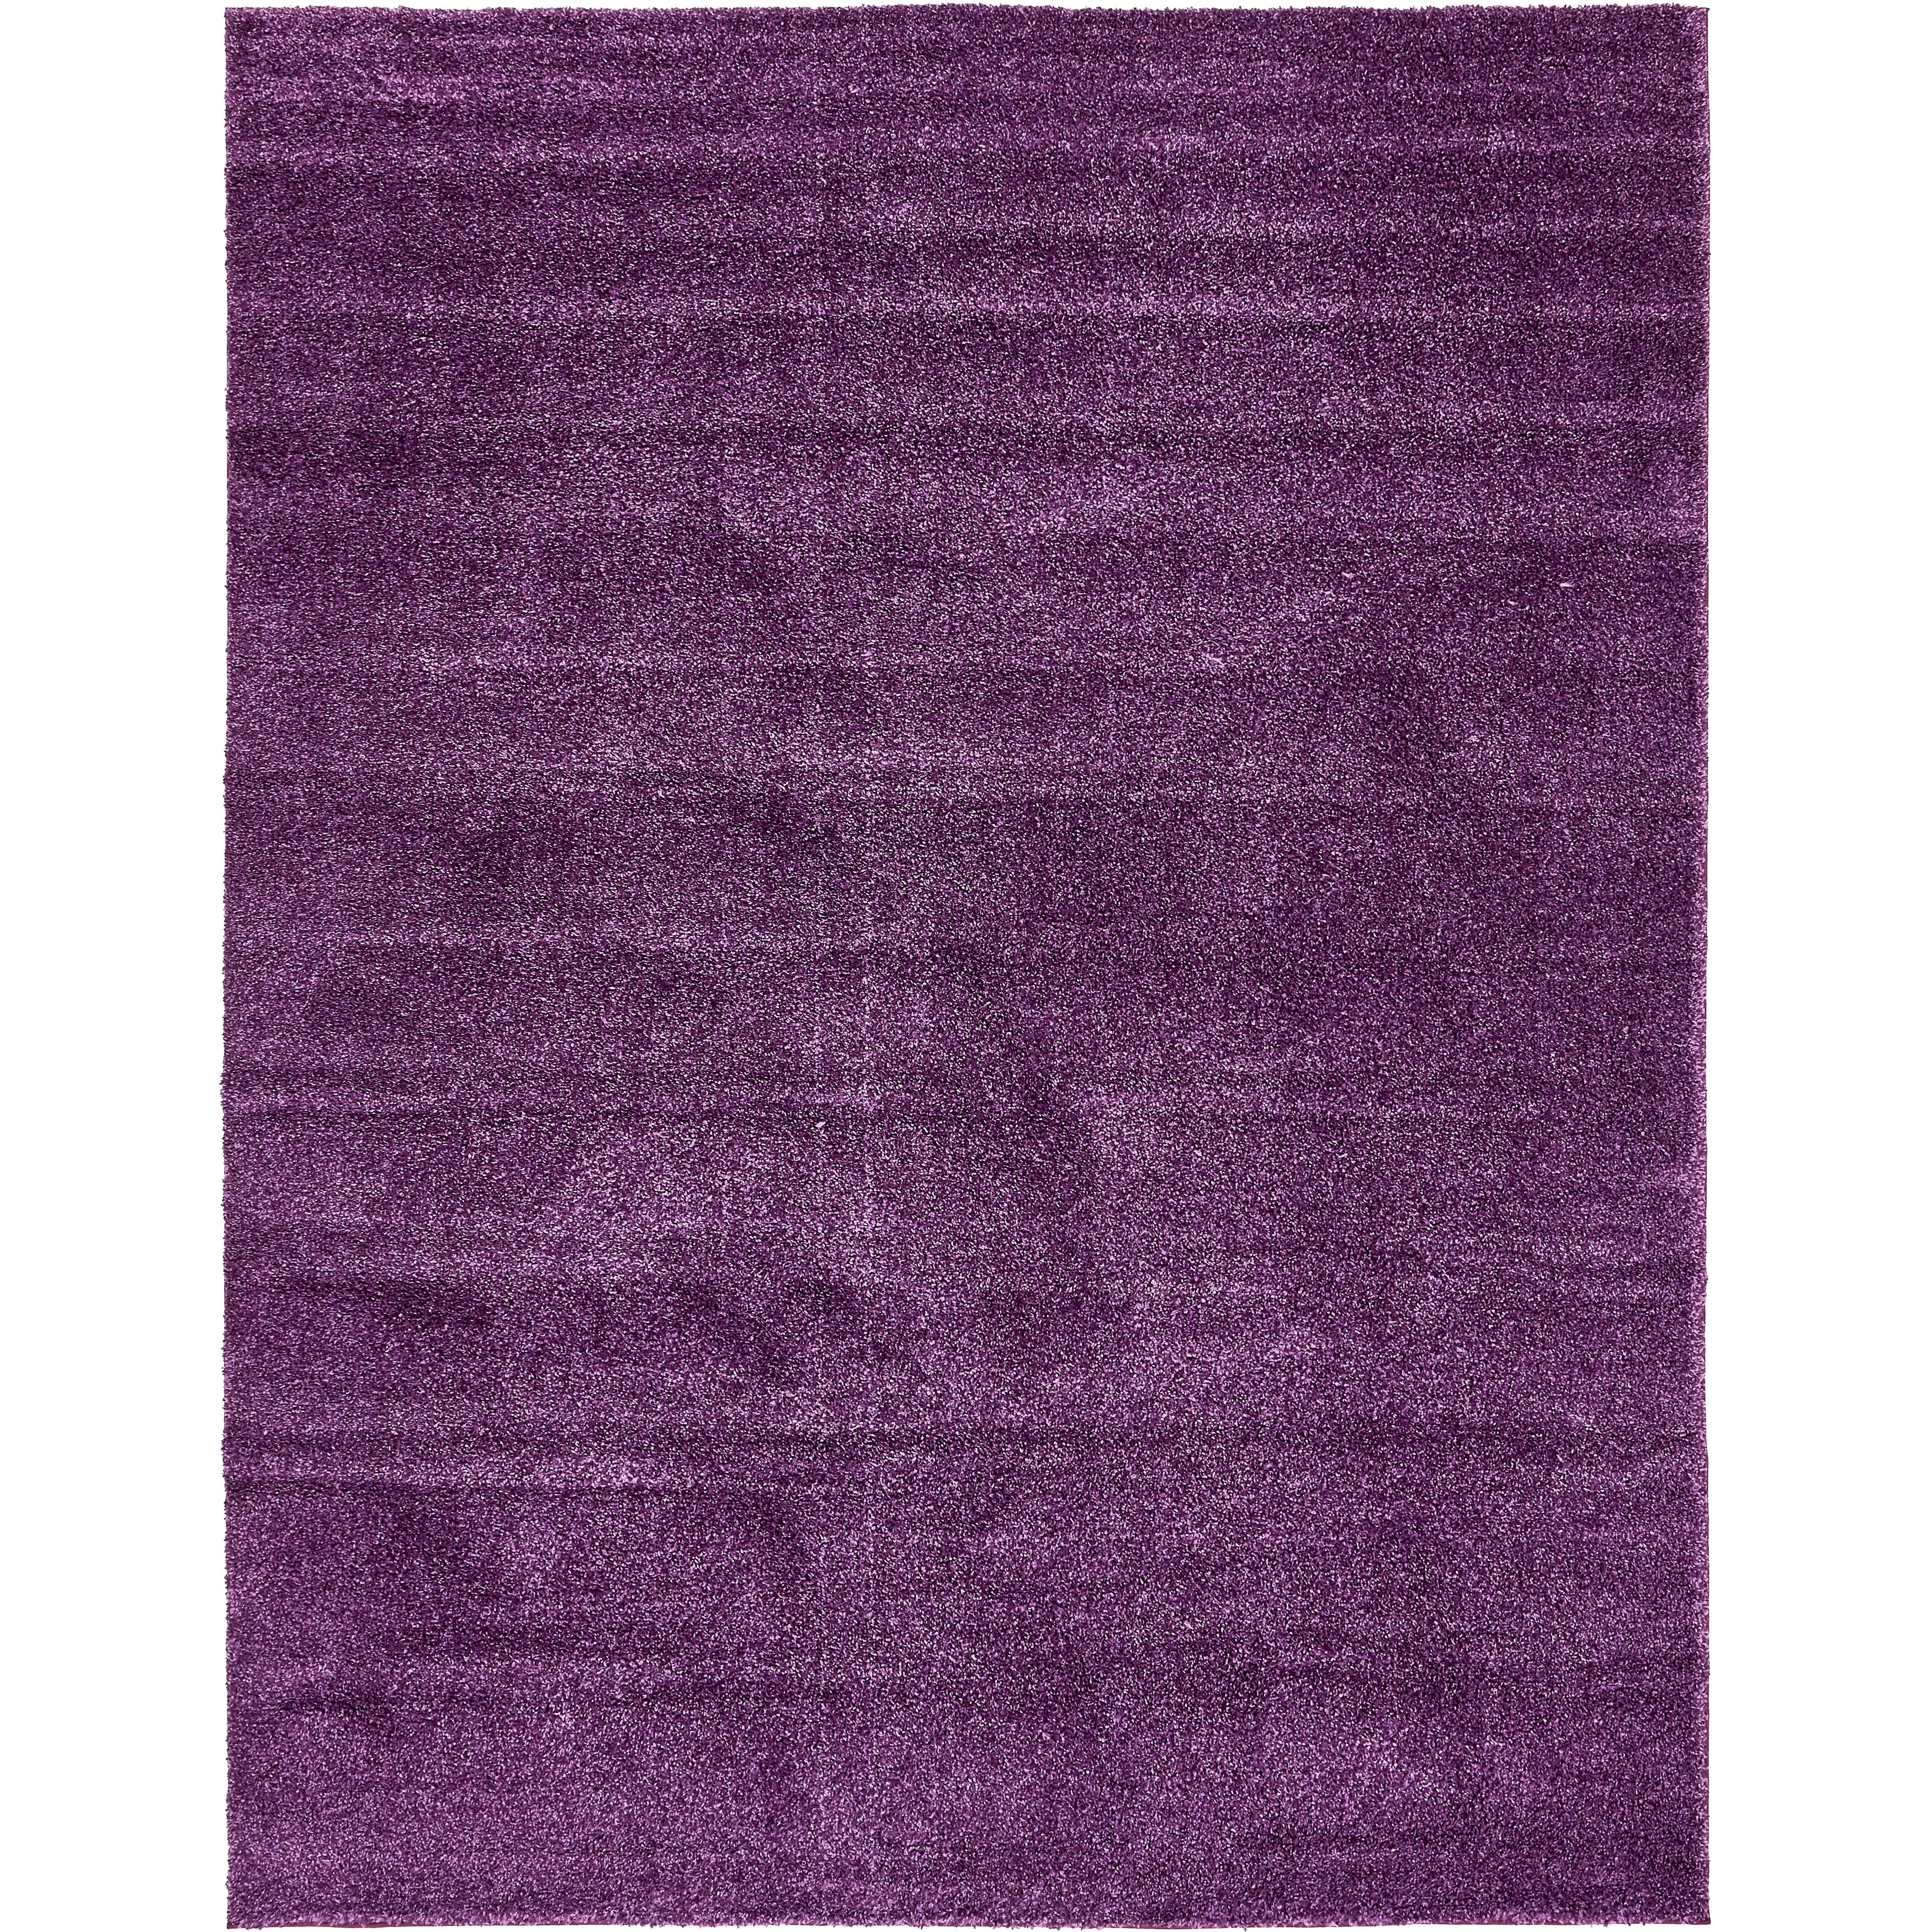 Buy Purple Area Rugs Online At Overstockcom Our Best Rugs Deals